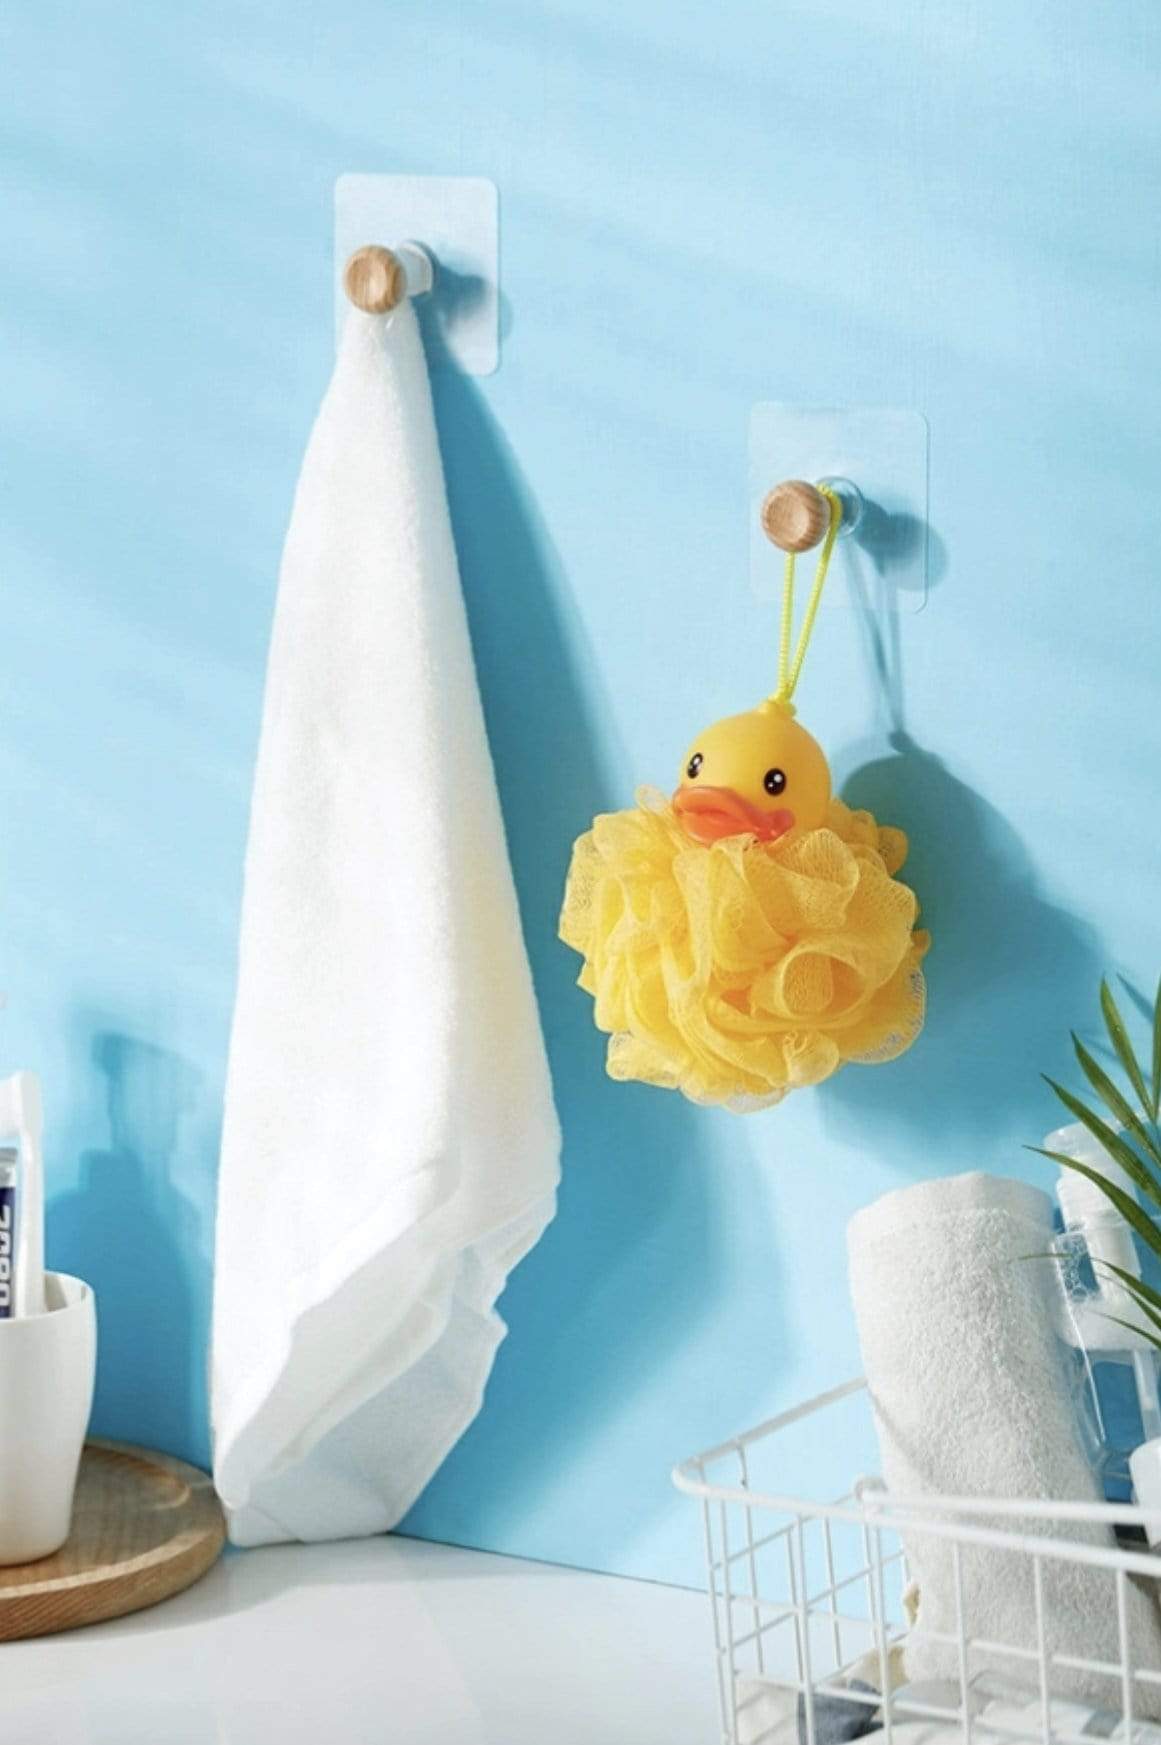 Helms Store Accessories B.Duck Bath Ball Scrub for all ages